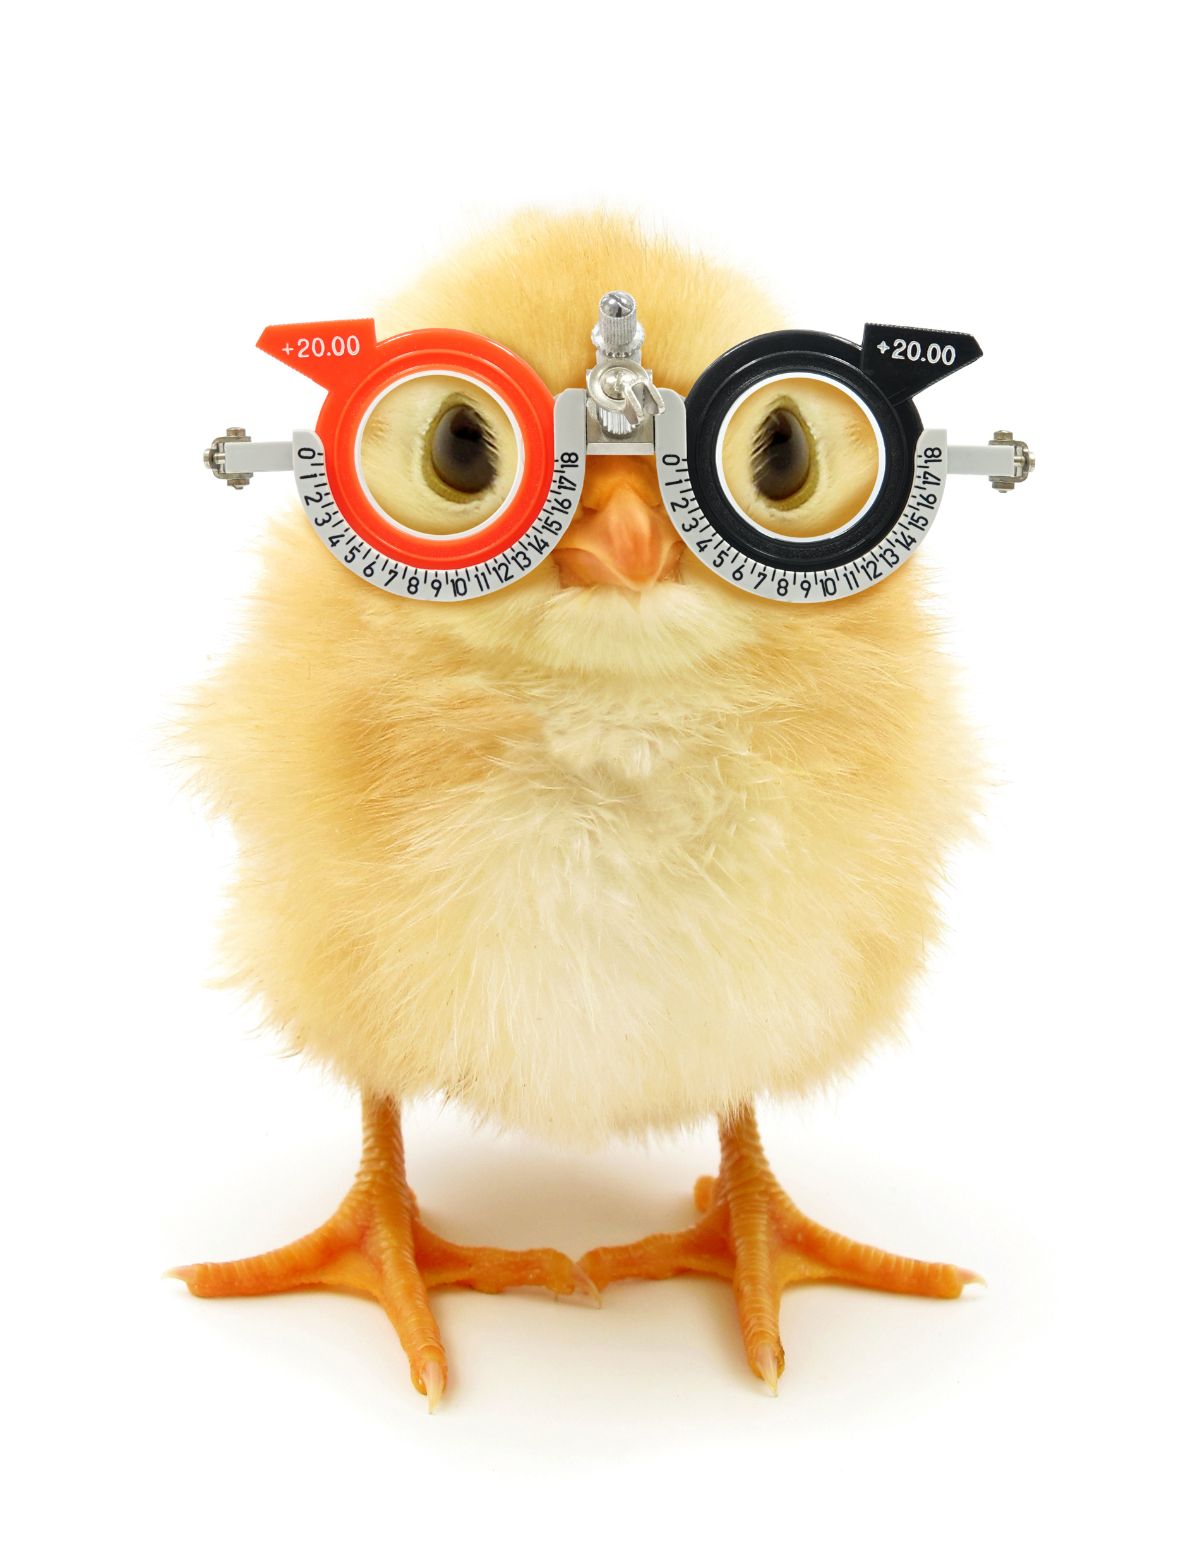 Chick with glasses.